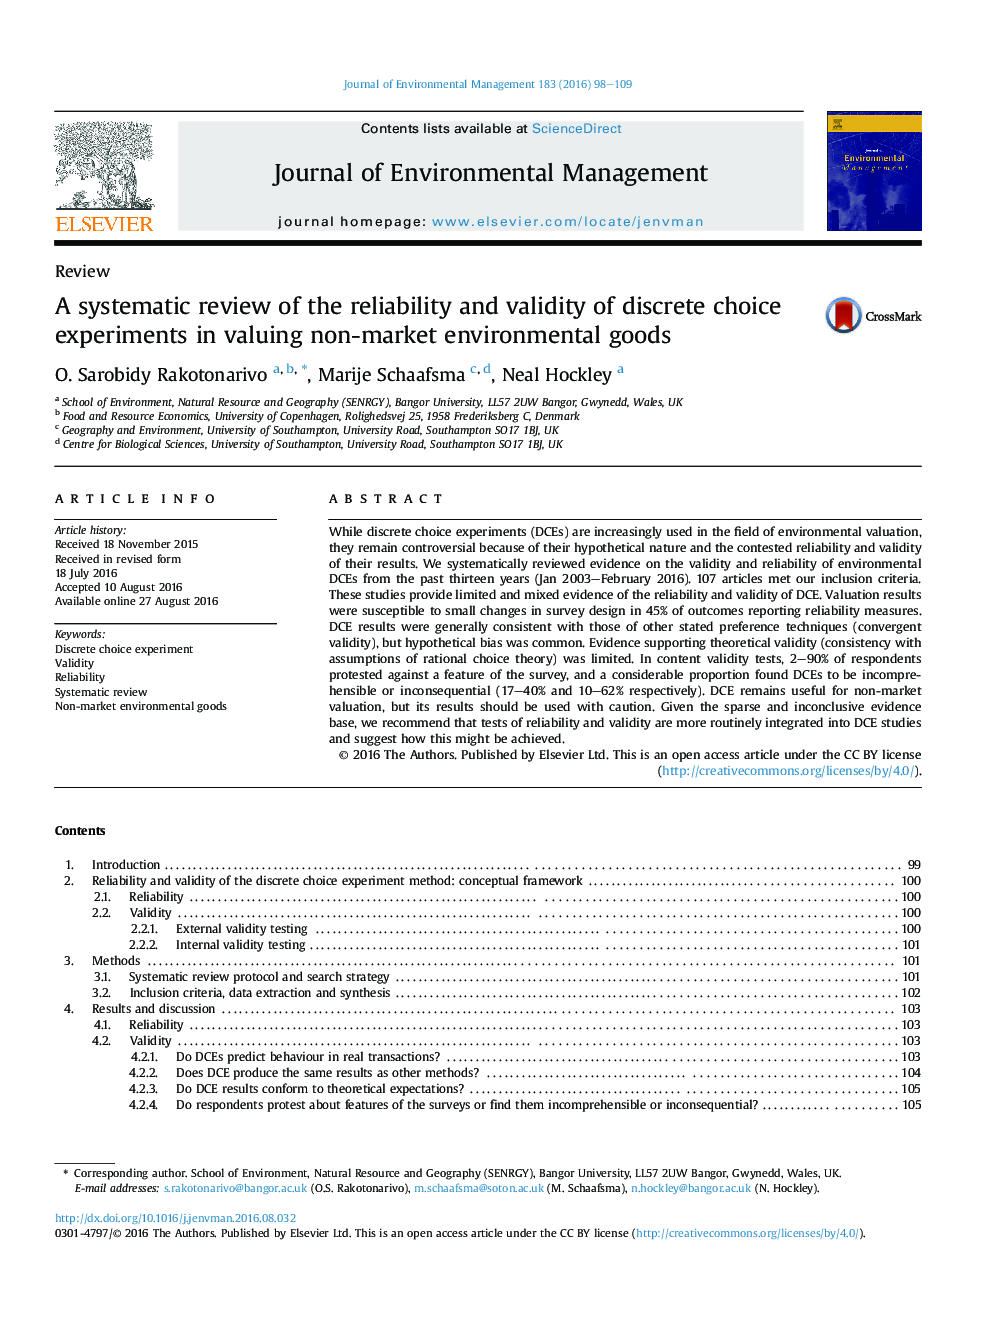 A systematic review of the reliability and validity of discrete choice experiments in valuing non-market environmental goods